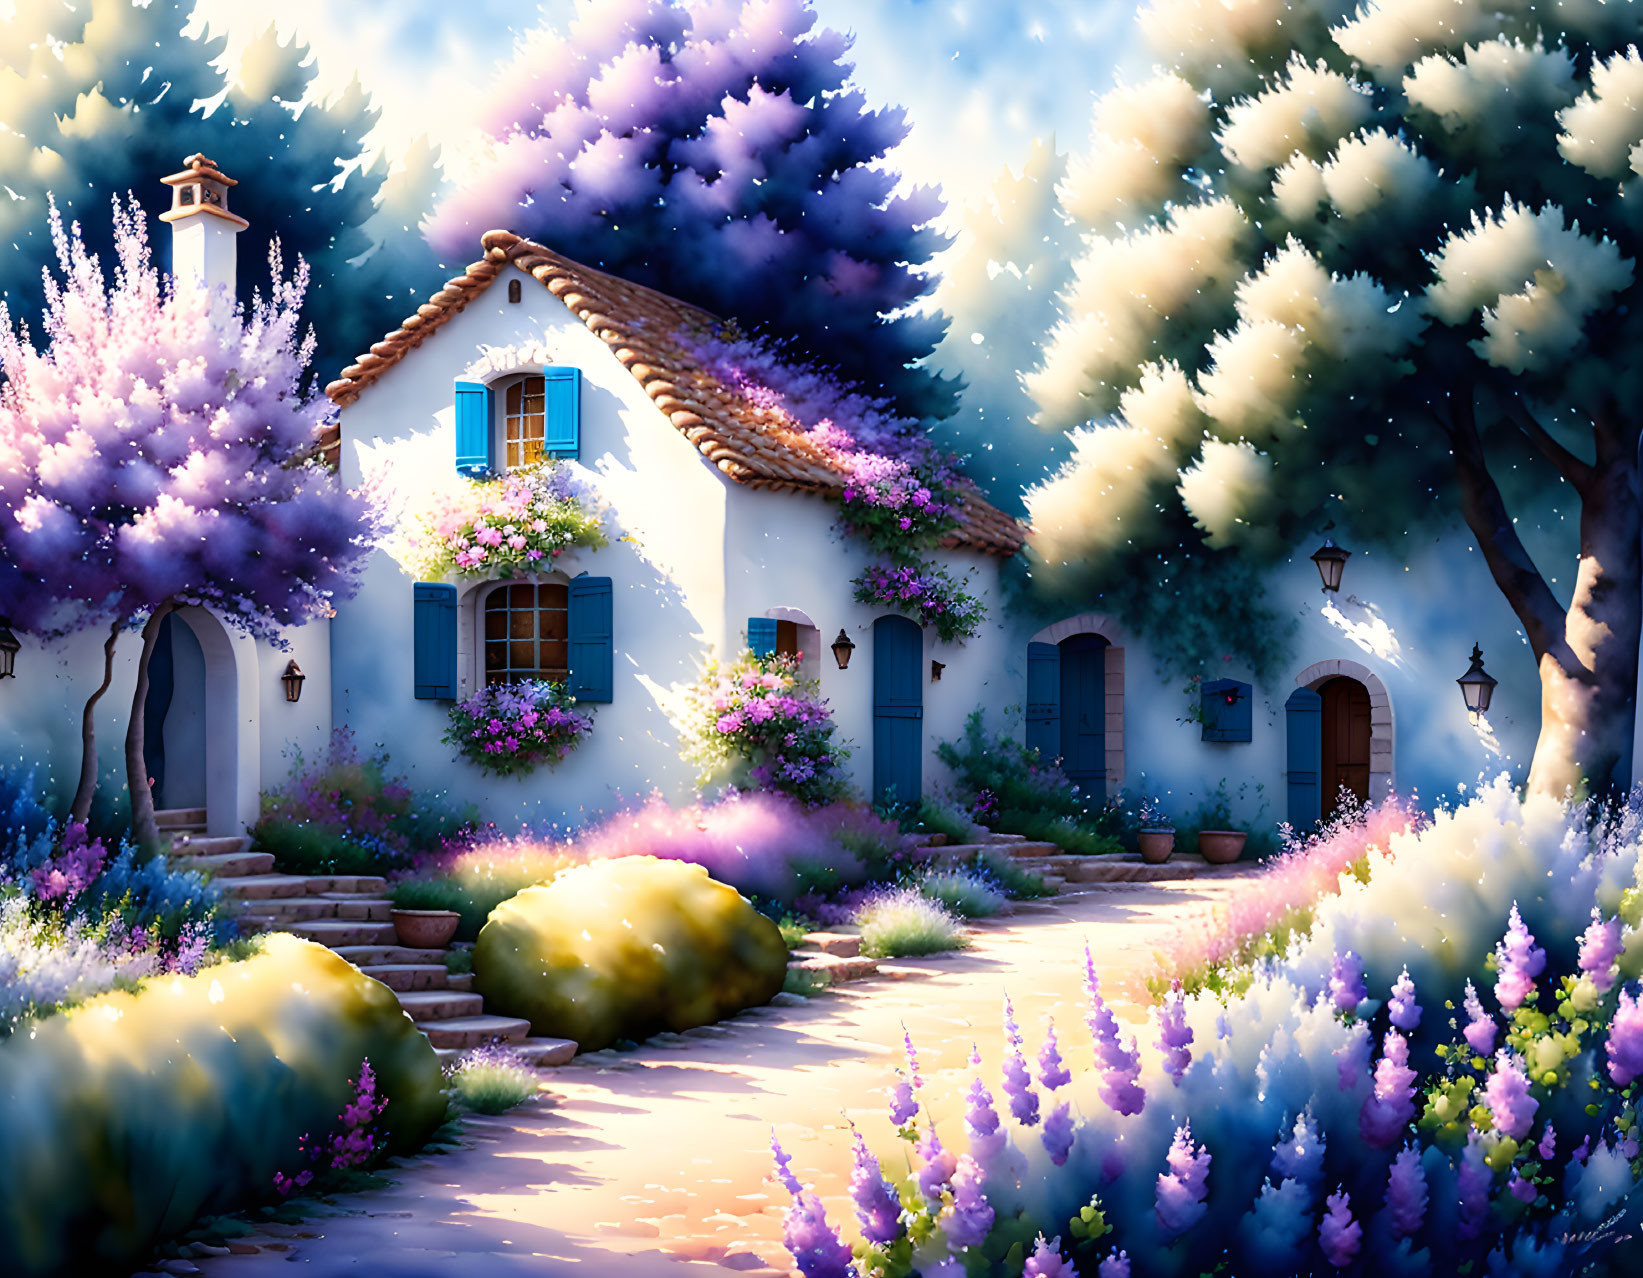 Provence style cozy house among flowers